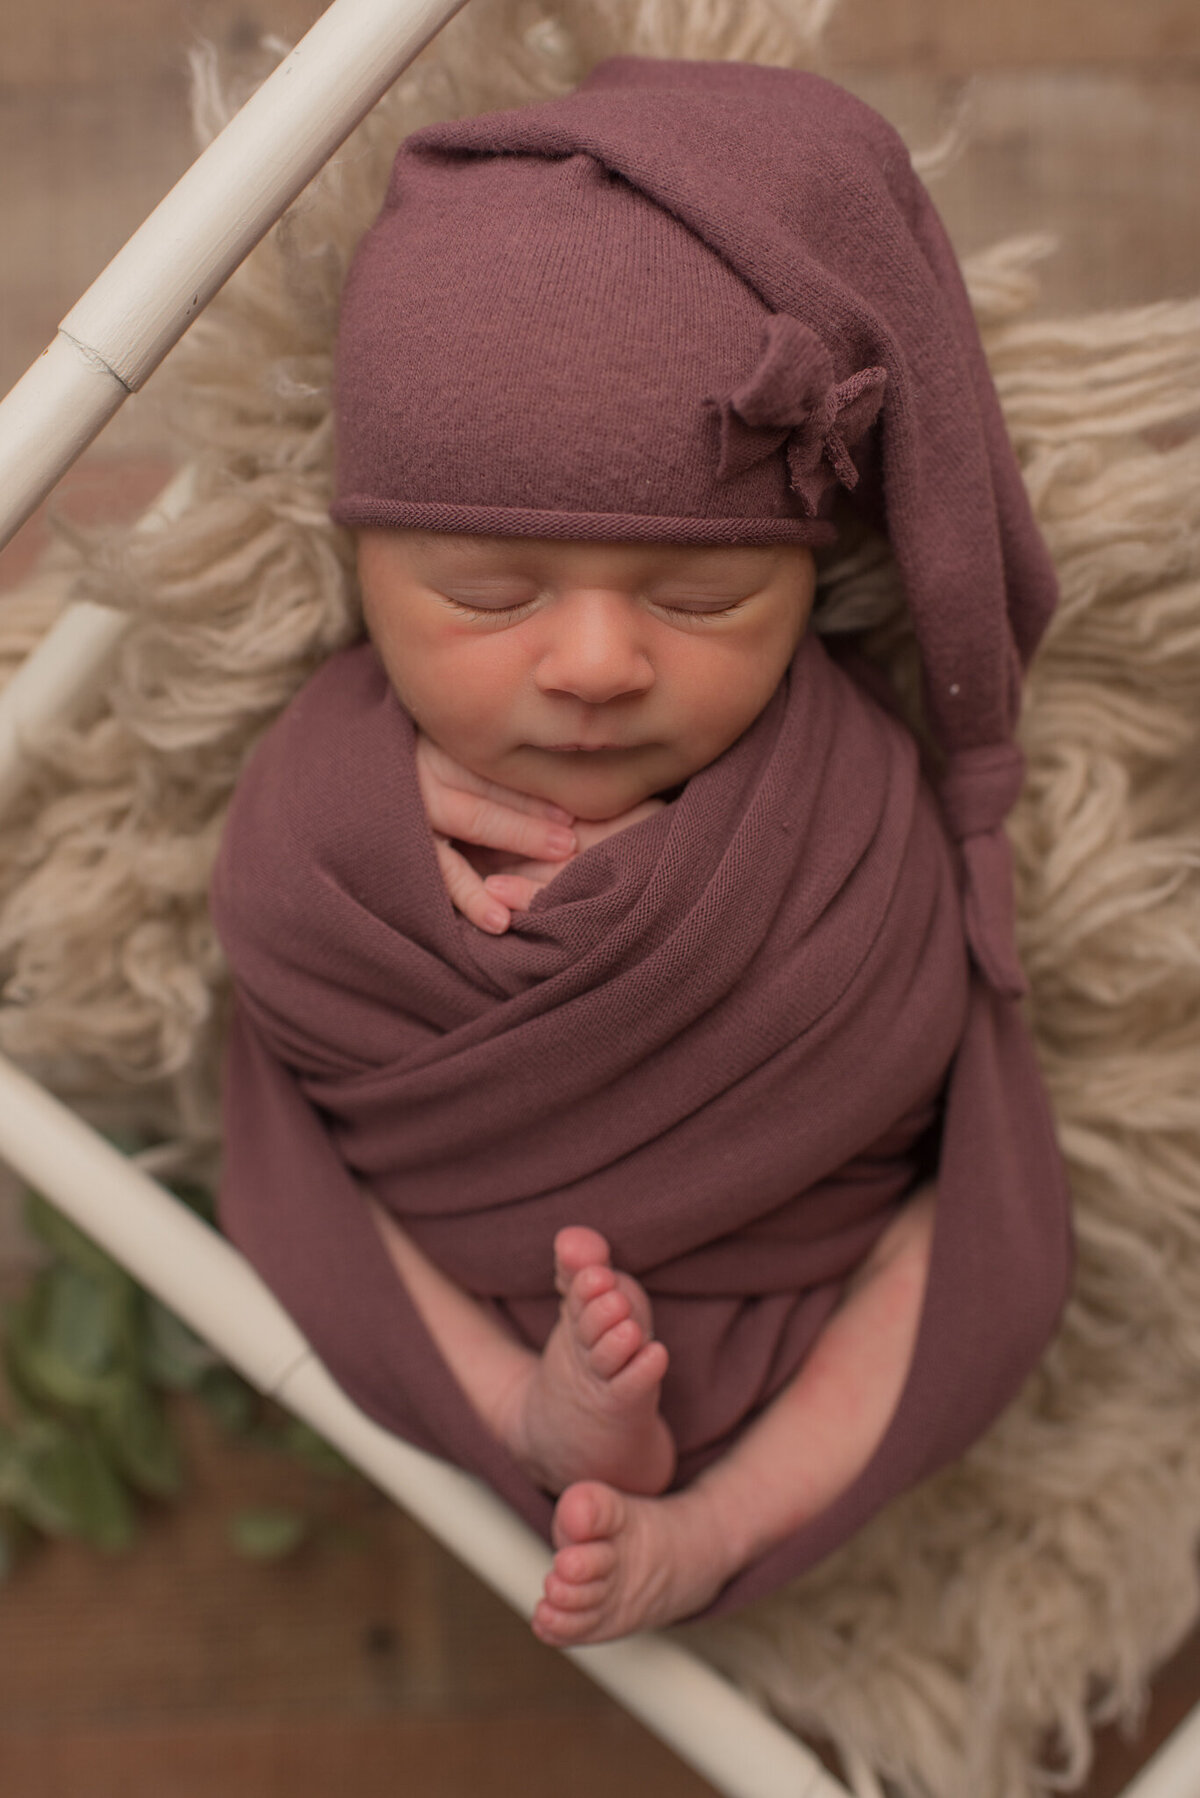 Newborn baby girl wearing purple wrap and hat with bow